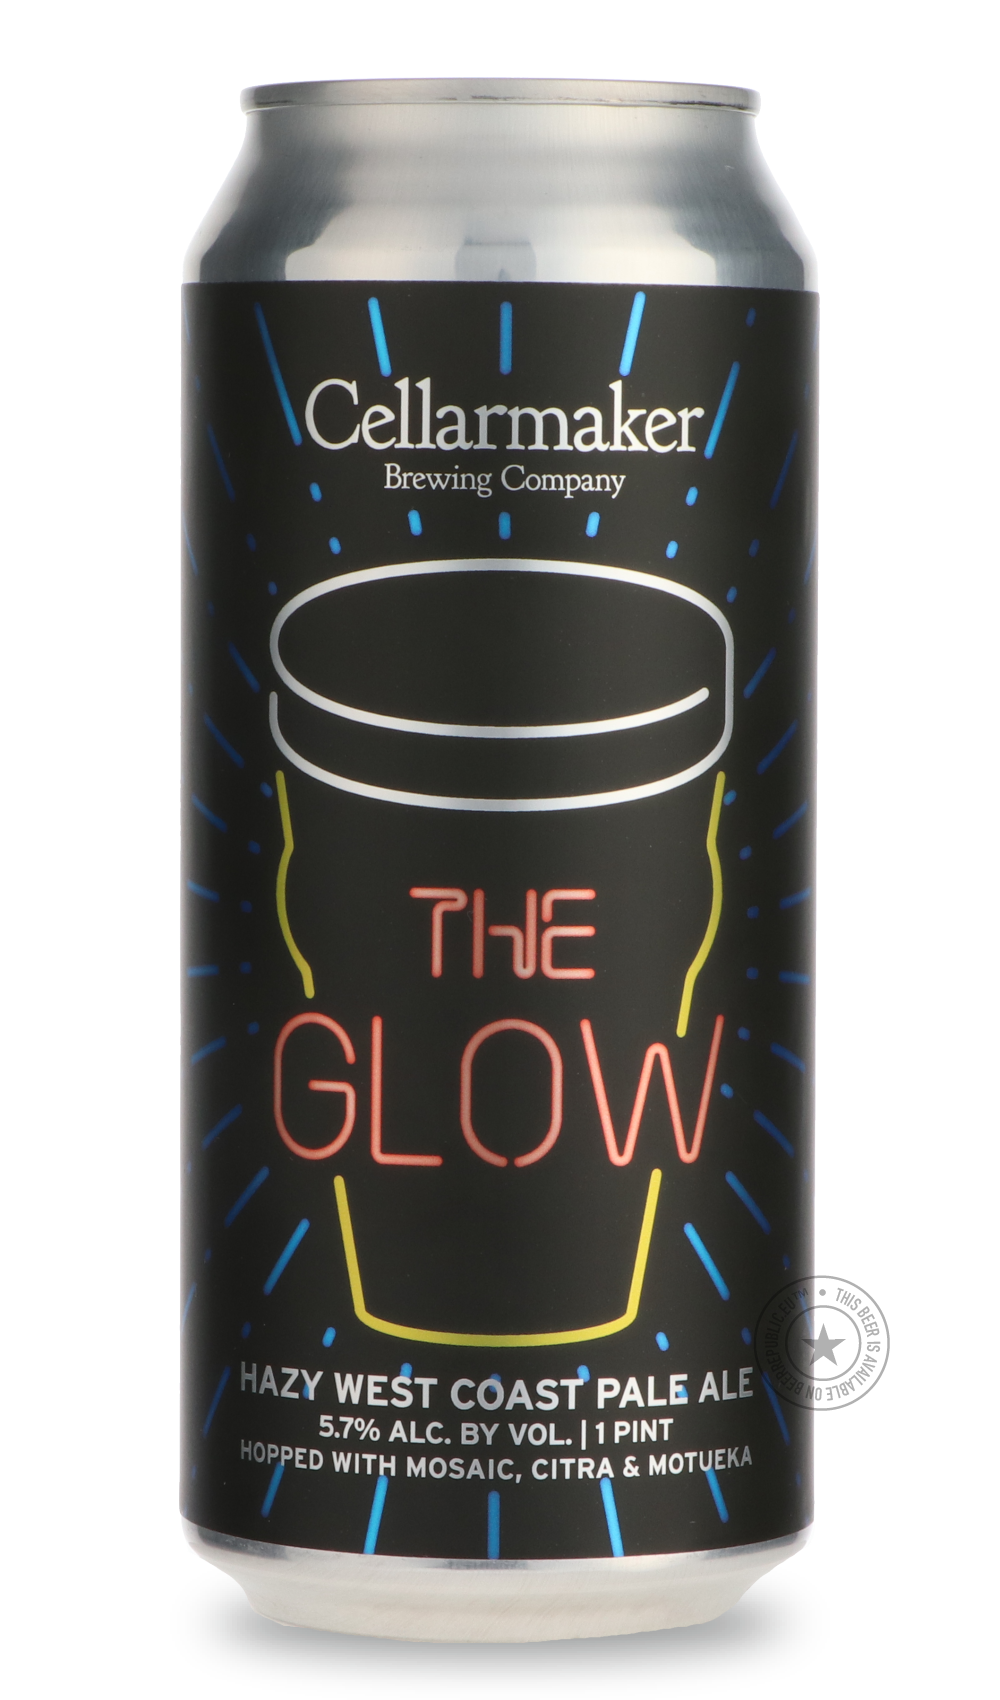 -Cellarmaker- The Glow-Pale- Only @ Beer Republic - The best online beer store for American & Canadian craft beer - Buy beer online from the USA and Canada - Bier online kopen - Amerikaans bier kopen - Craft beer store - Craft beer kopen - Amerikanisch bier kaufen - Bier online kaufen - Acheter biere online - IPA - Stout - Porter - New England IPA - Hazy IPA - Imperial Stout - Barrel Aged - Barrel Aged Imperial Stout - Brown - Dark beer - Blond - Blonde - Pilsner - Lager - Wheat - Weizen - Amber - Barley Wi